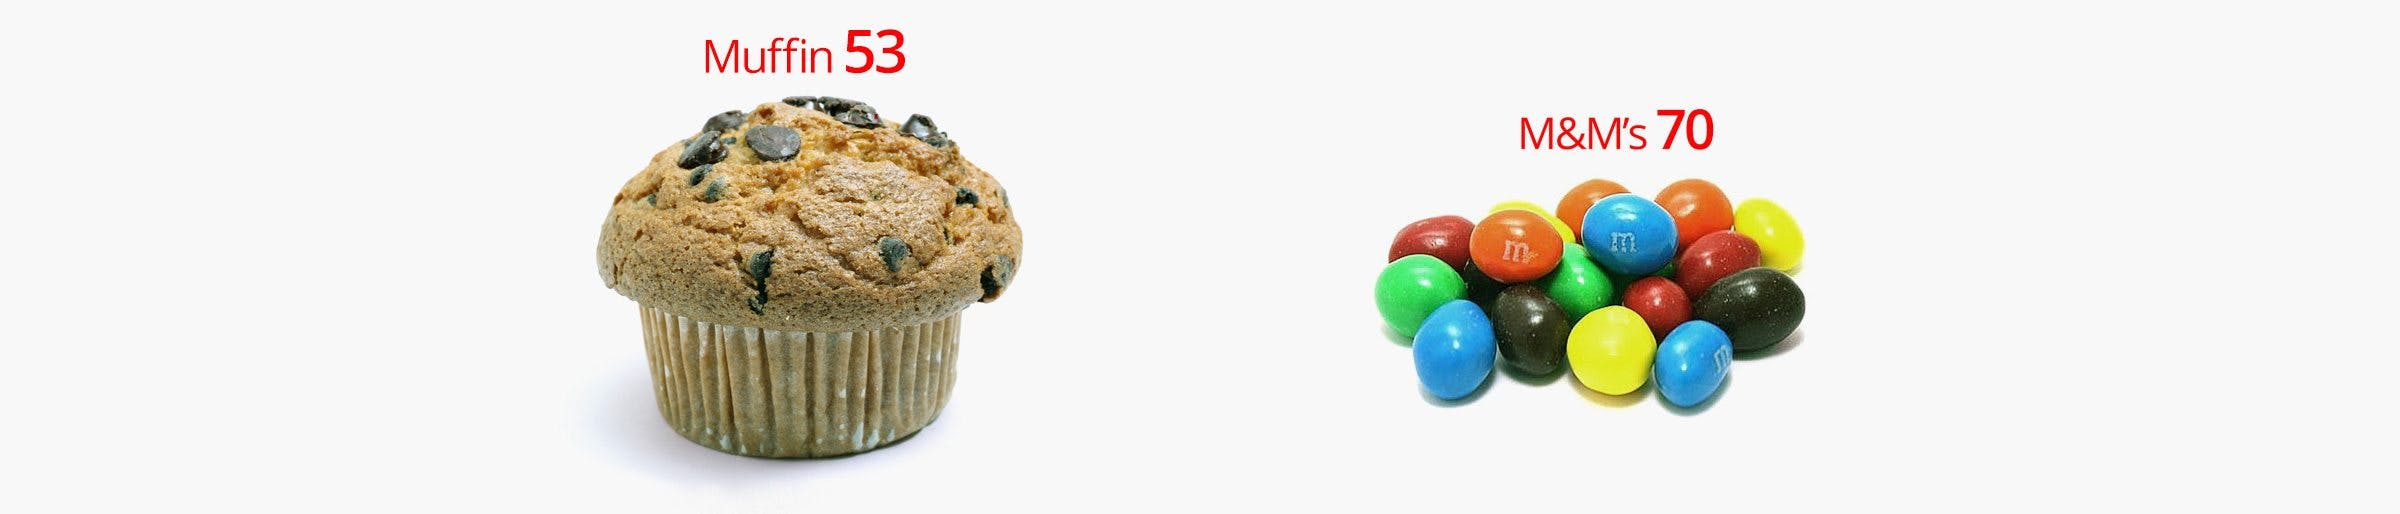 Muffin or M&M's